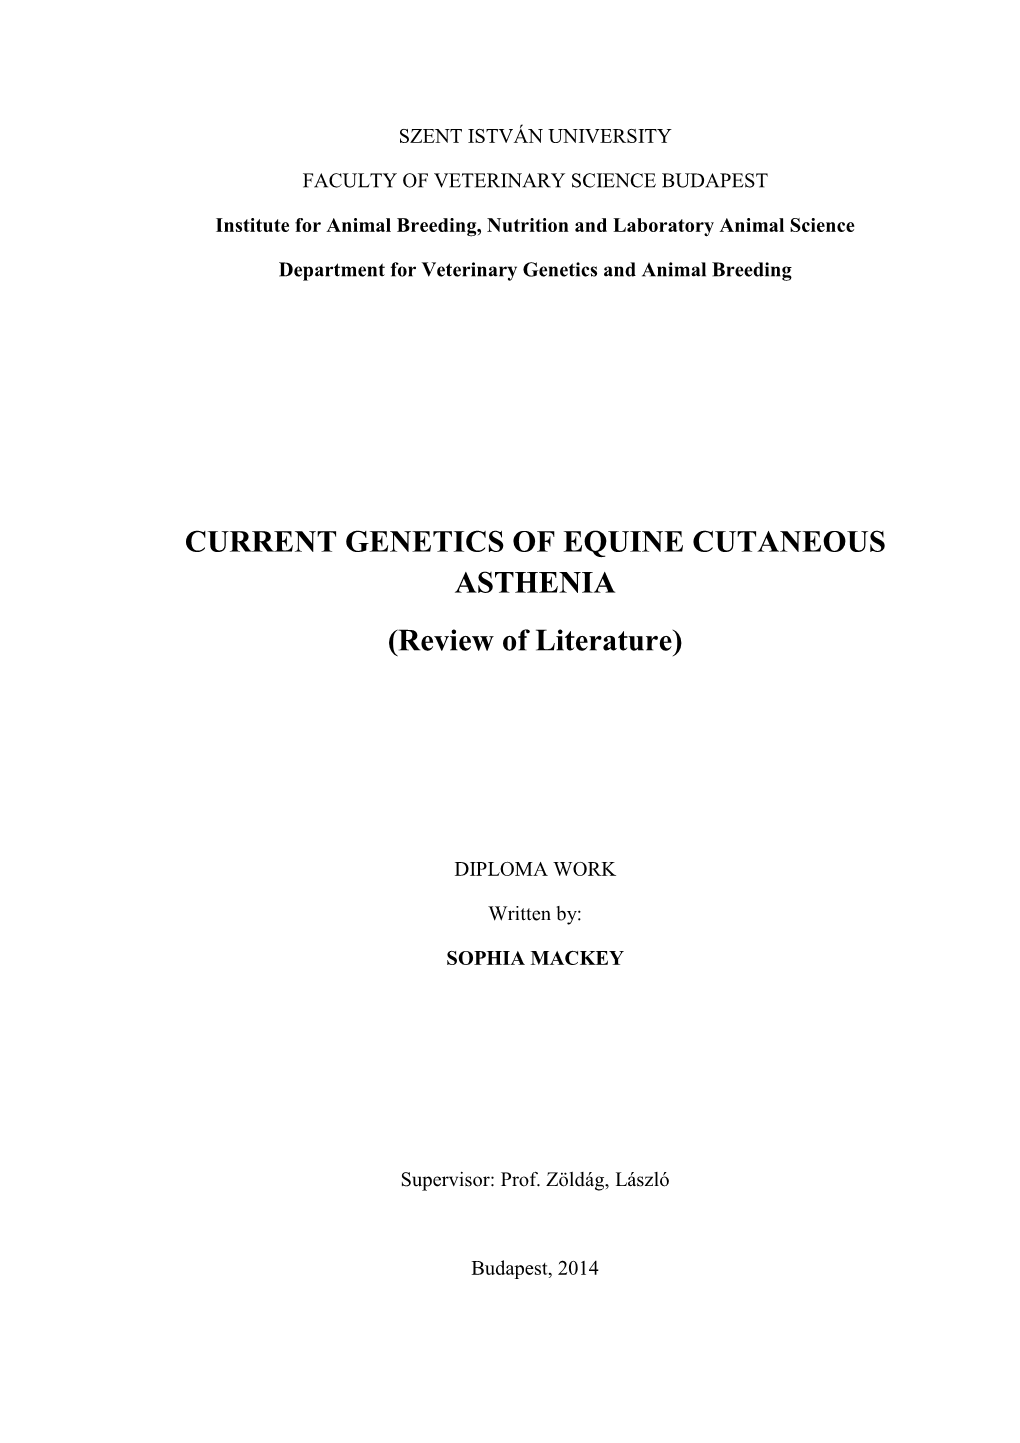 CURRENT GENETICS of EQUINE CUTANEOUS ASTHENIA (Review of Literature)